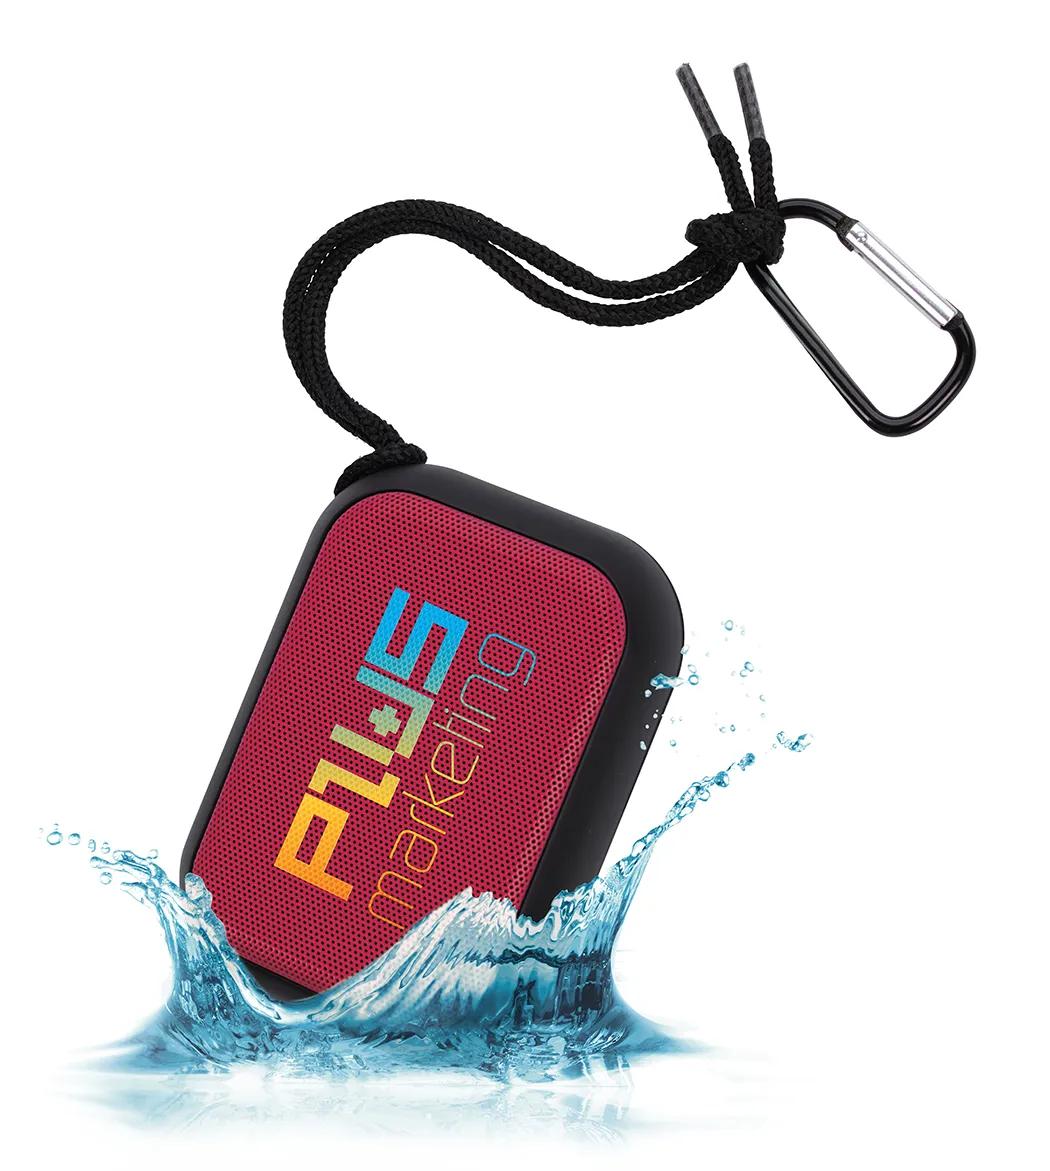 Travel-Size Water-resistant Bluetooth® Speaker 1 of 22